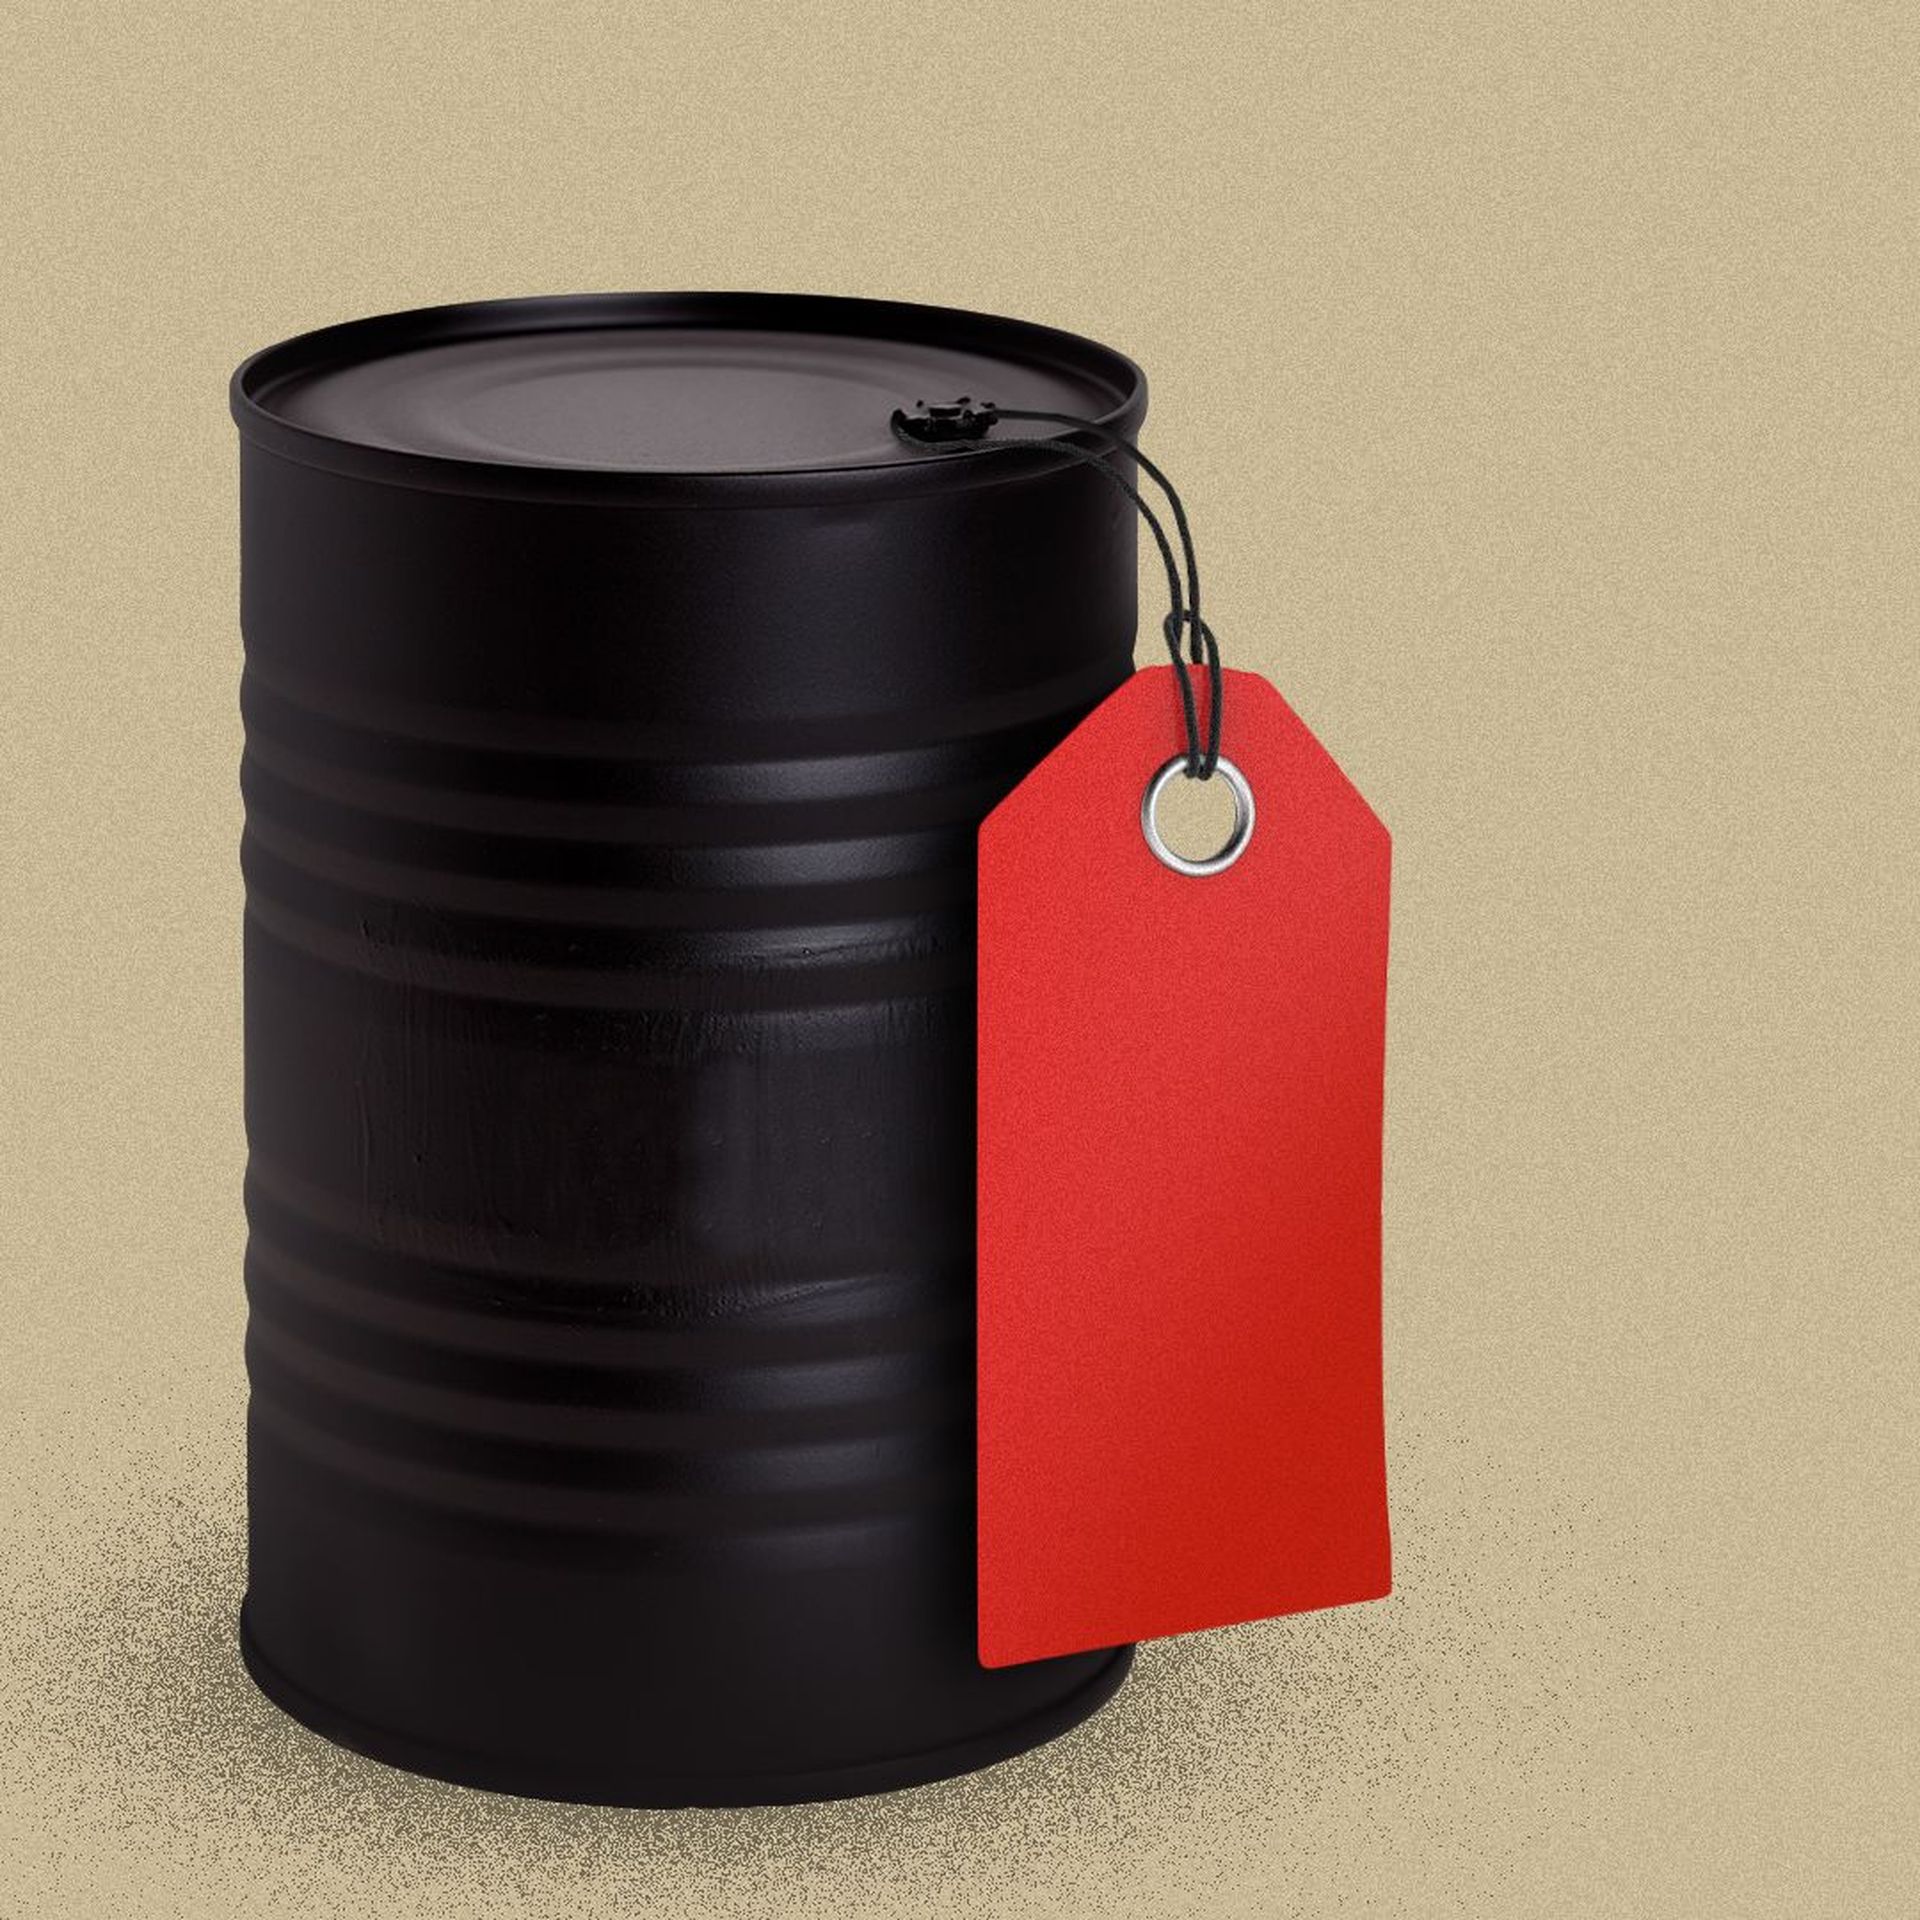 Illustration of an oil barrel with a red discount tag. 